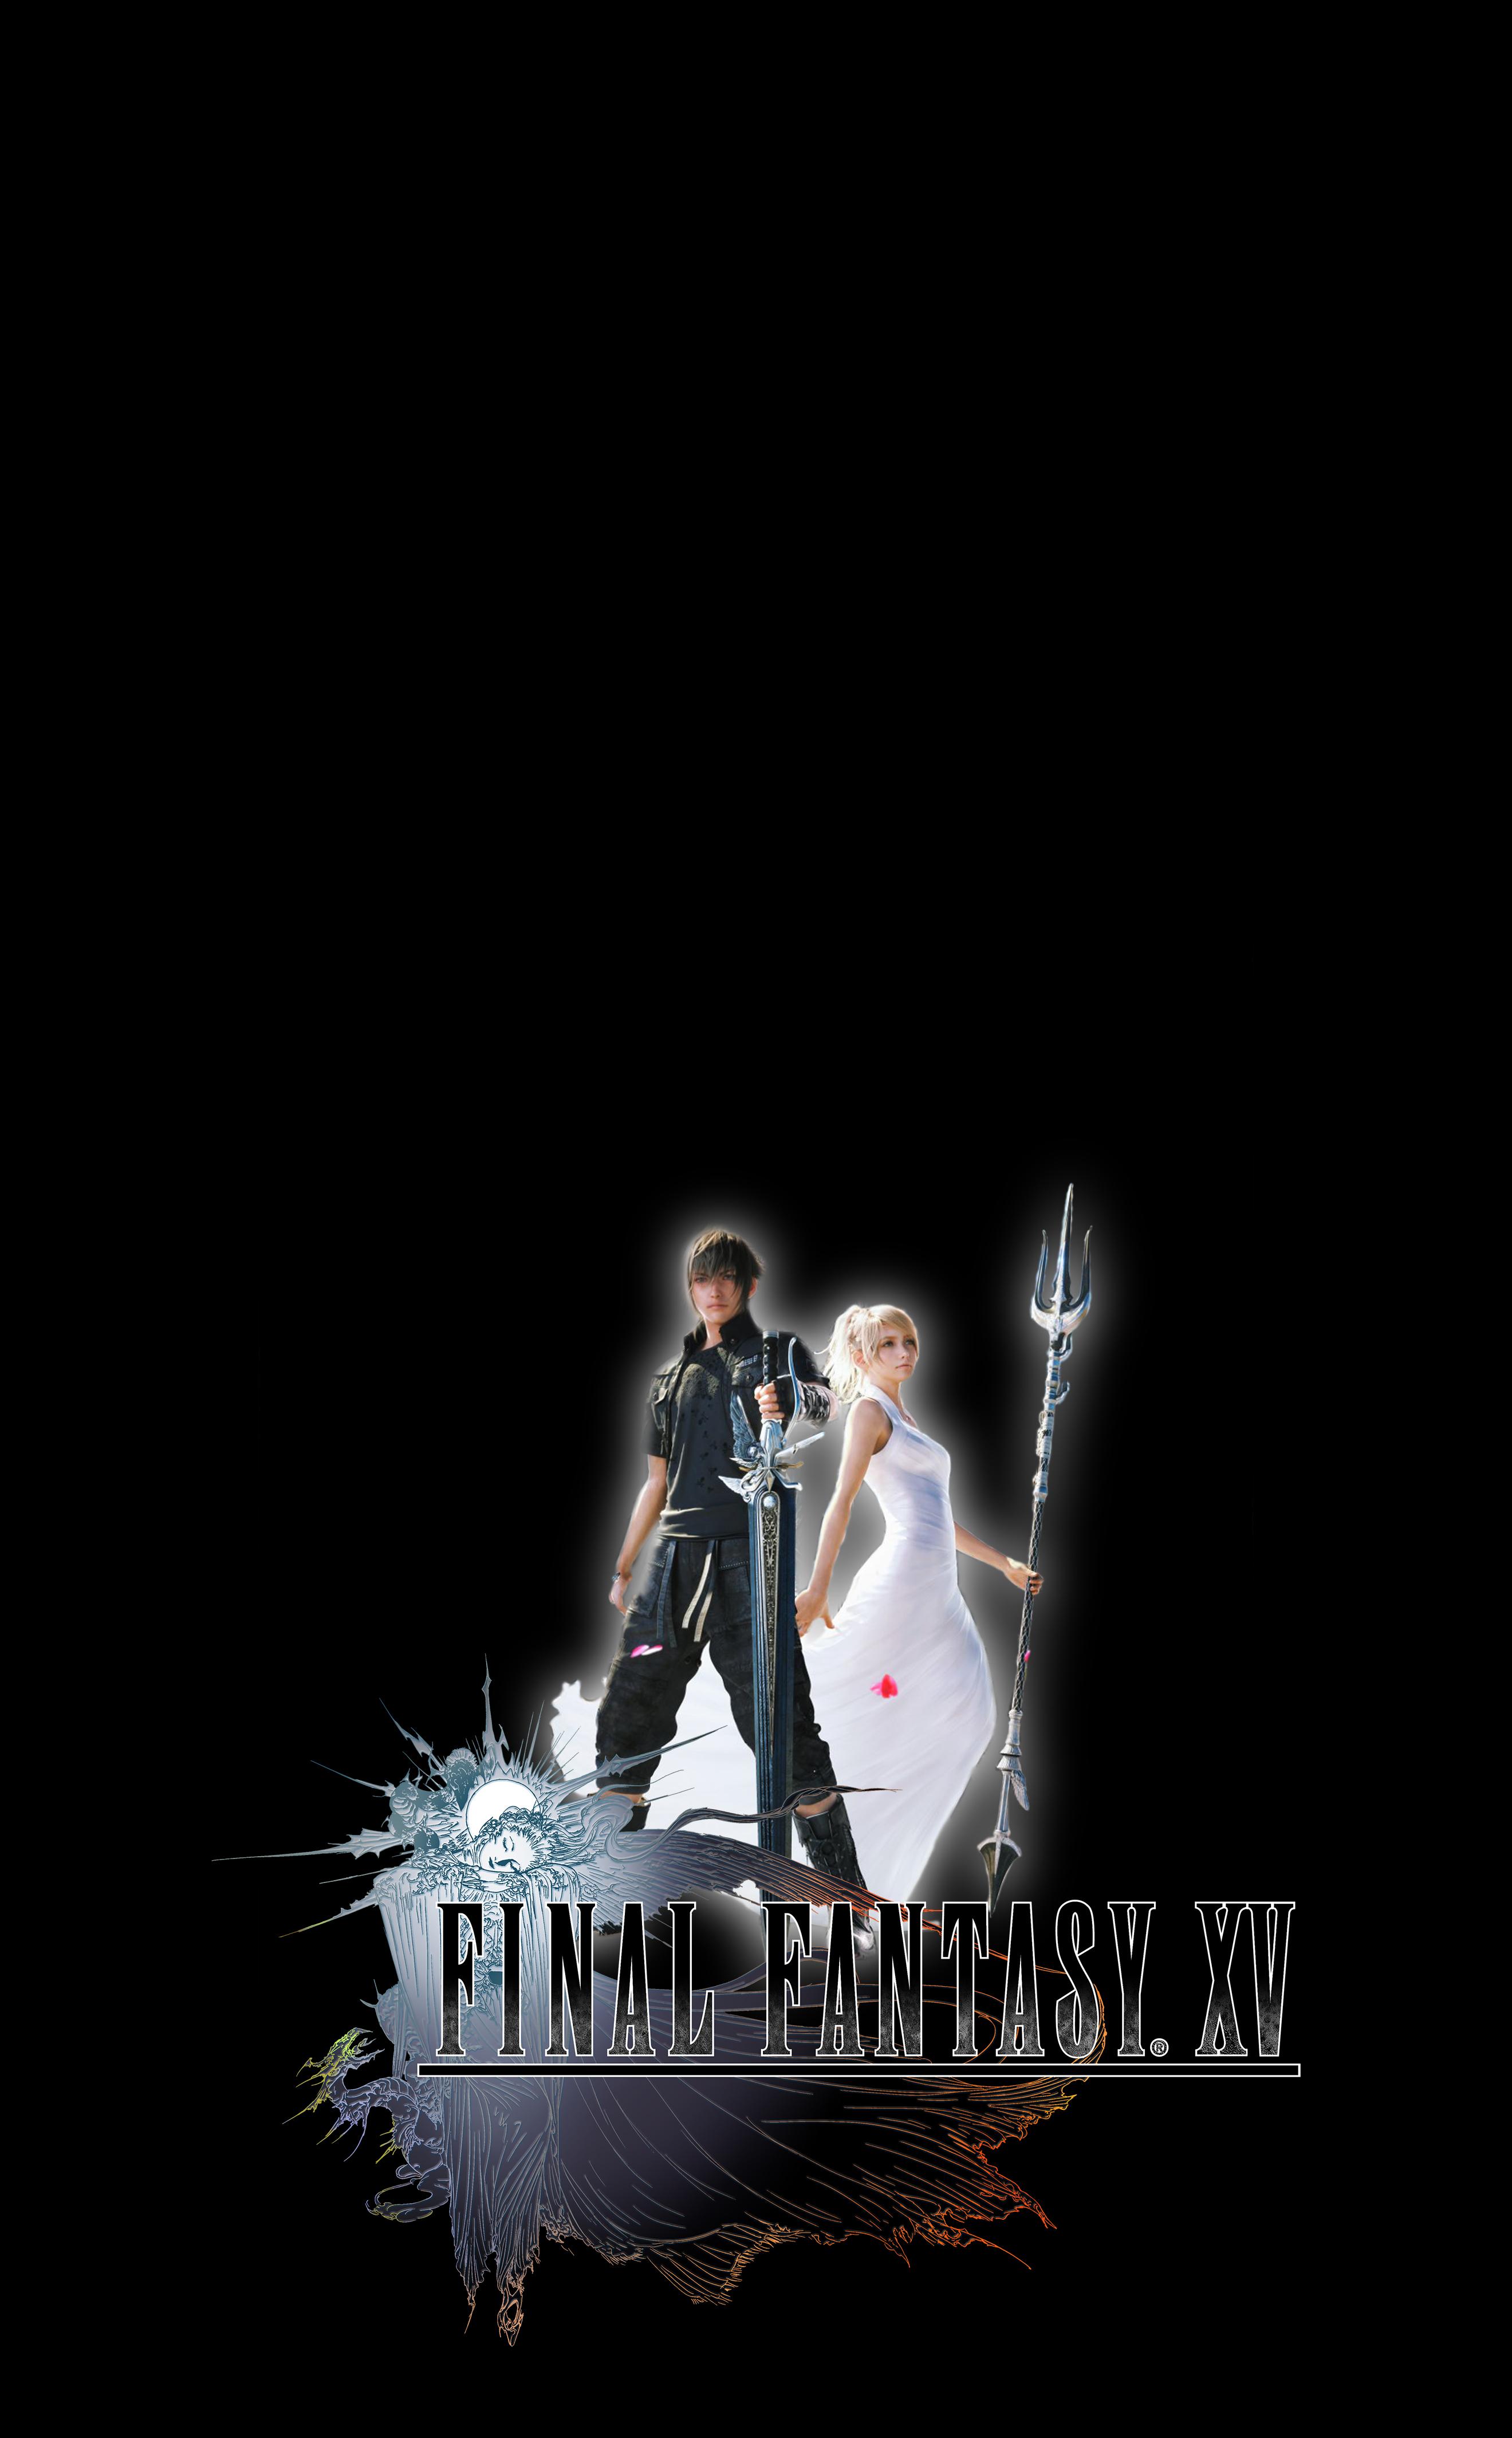 OLED Friendly Phone background of new art for FFXV